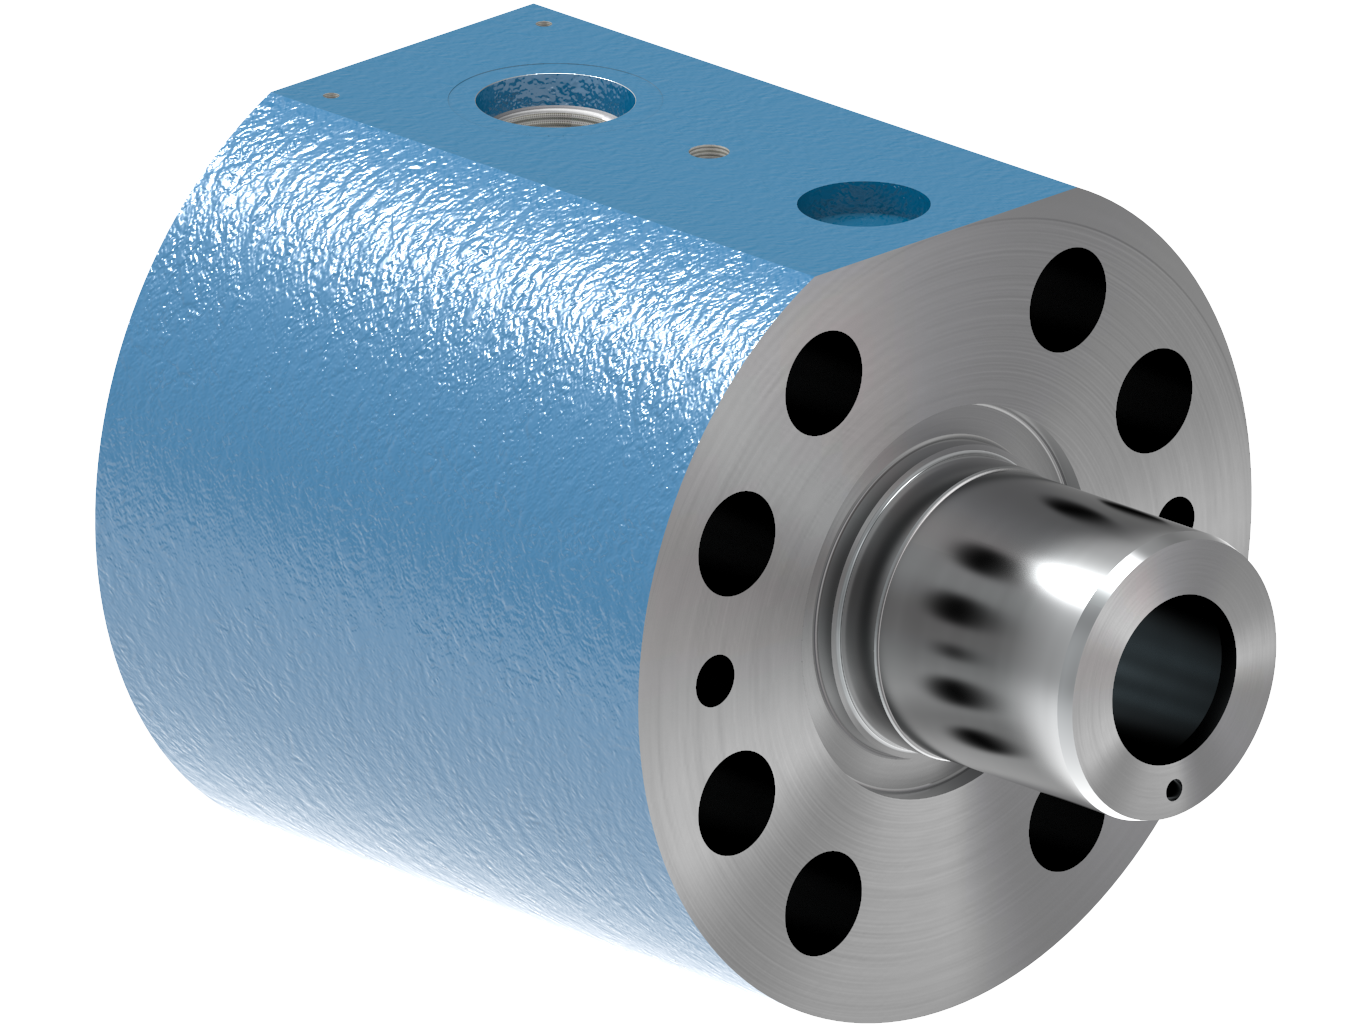 A rendering of a Cylinder Part from the KB100